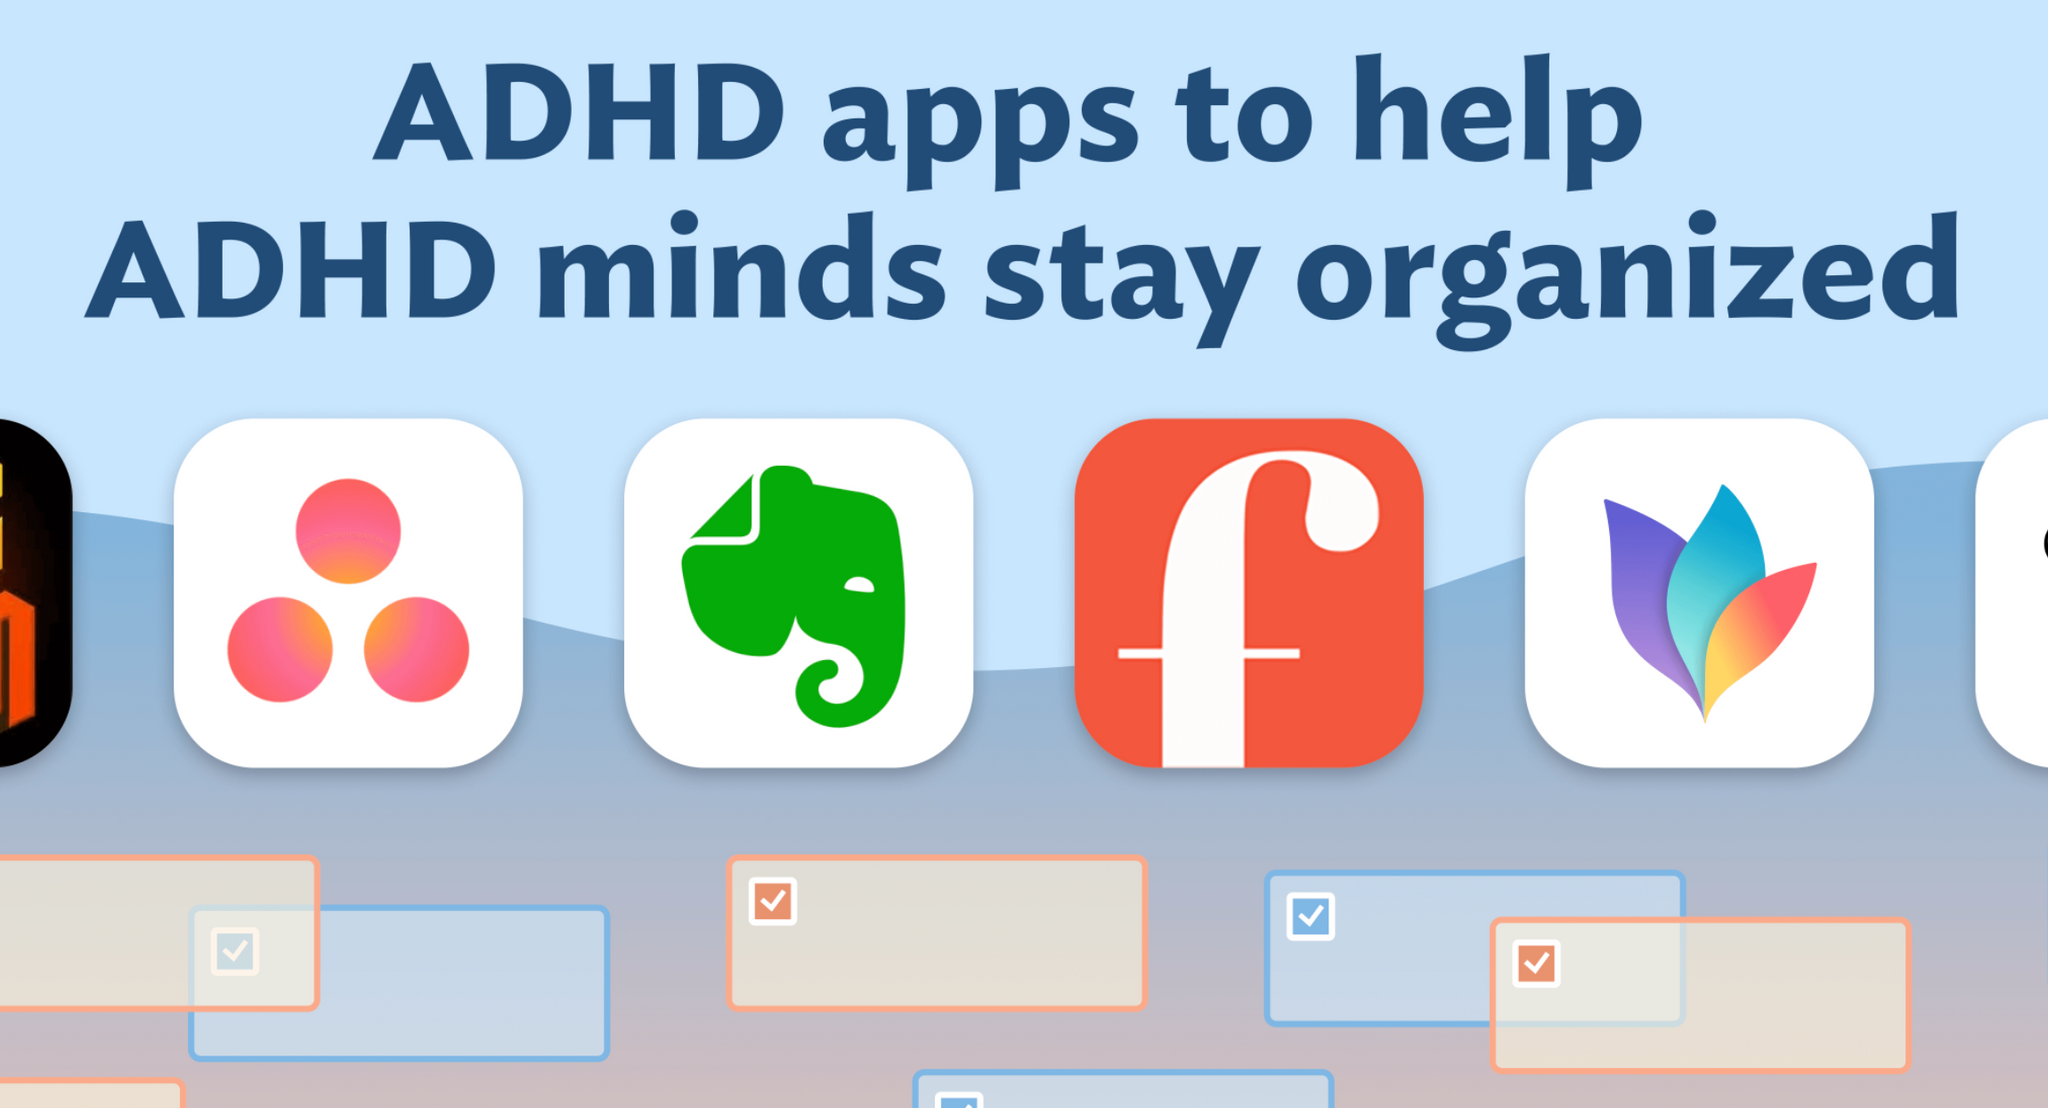 Boost Your Focus and Productivity with These Top 9 ADHD Apps